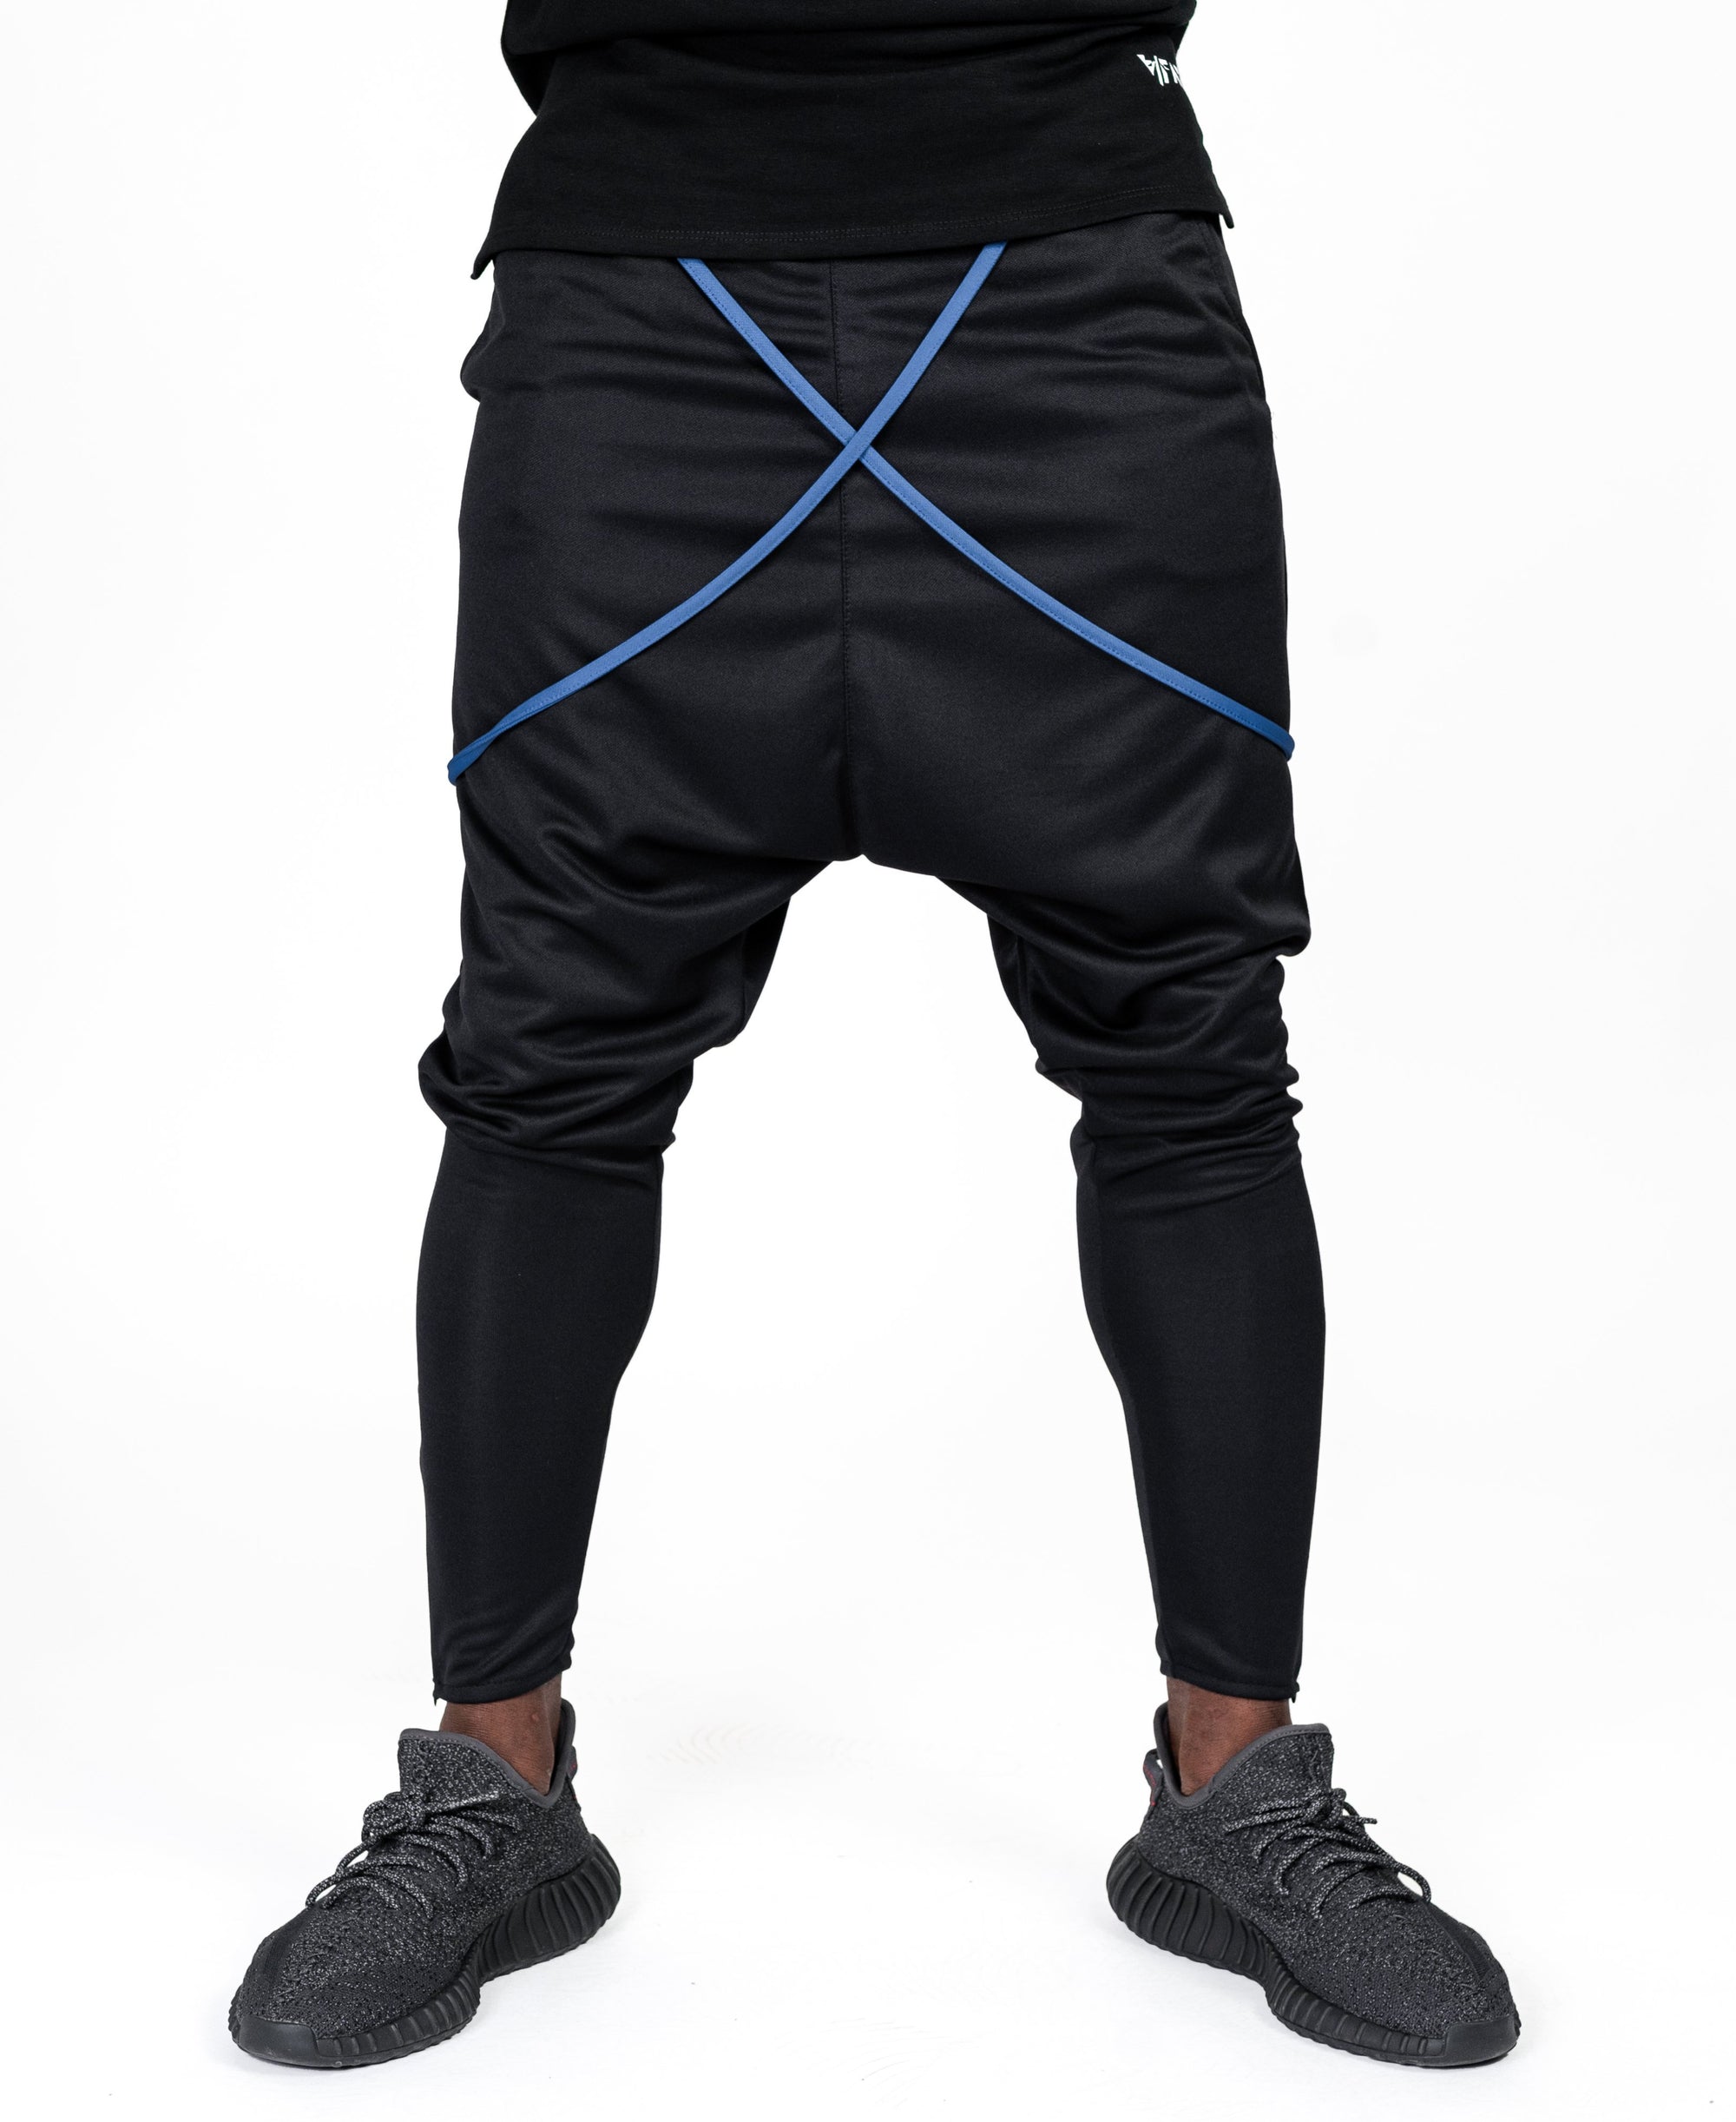 Black trousers with blue design - Fatai Style